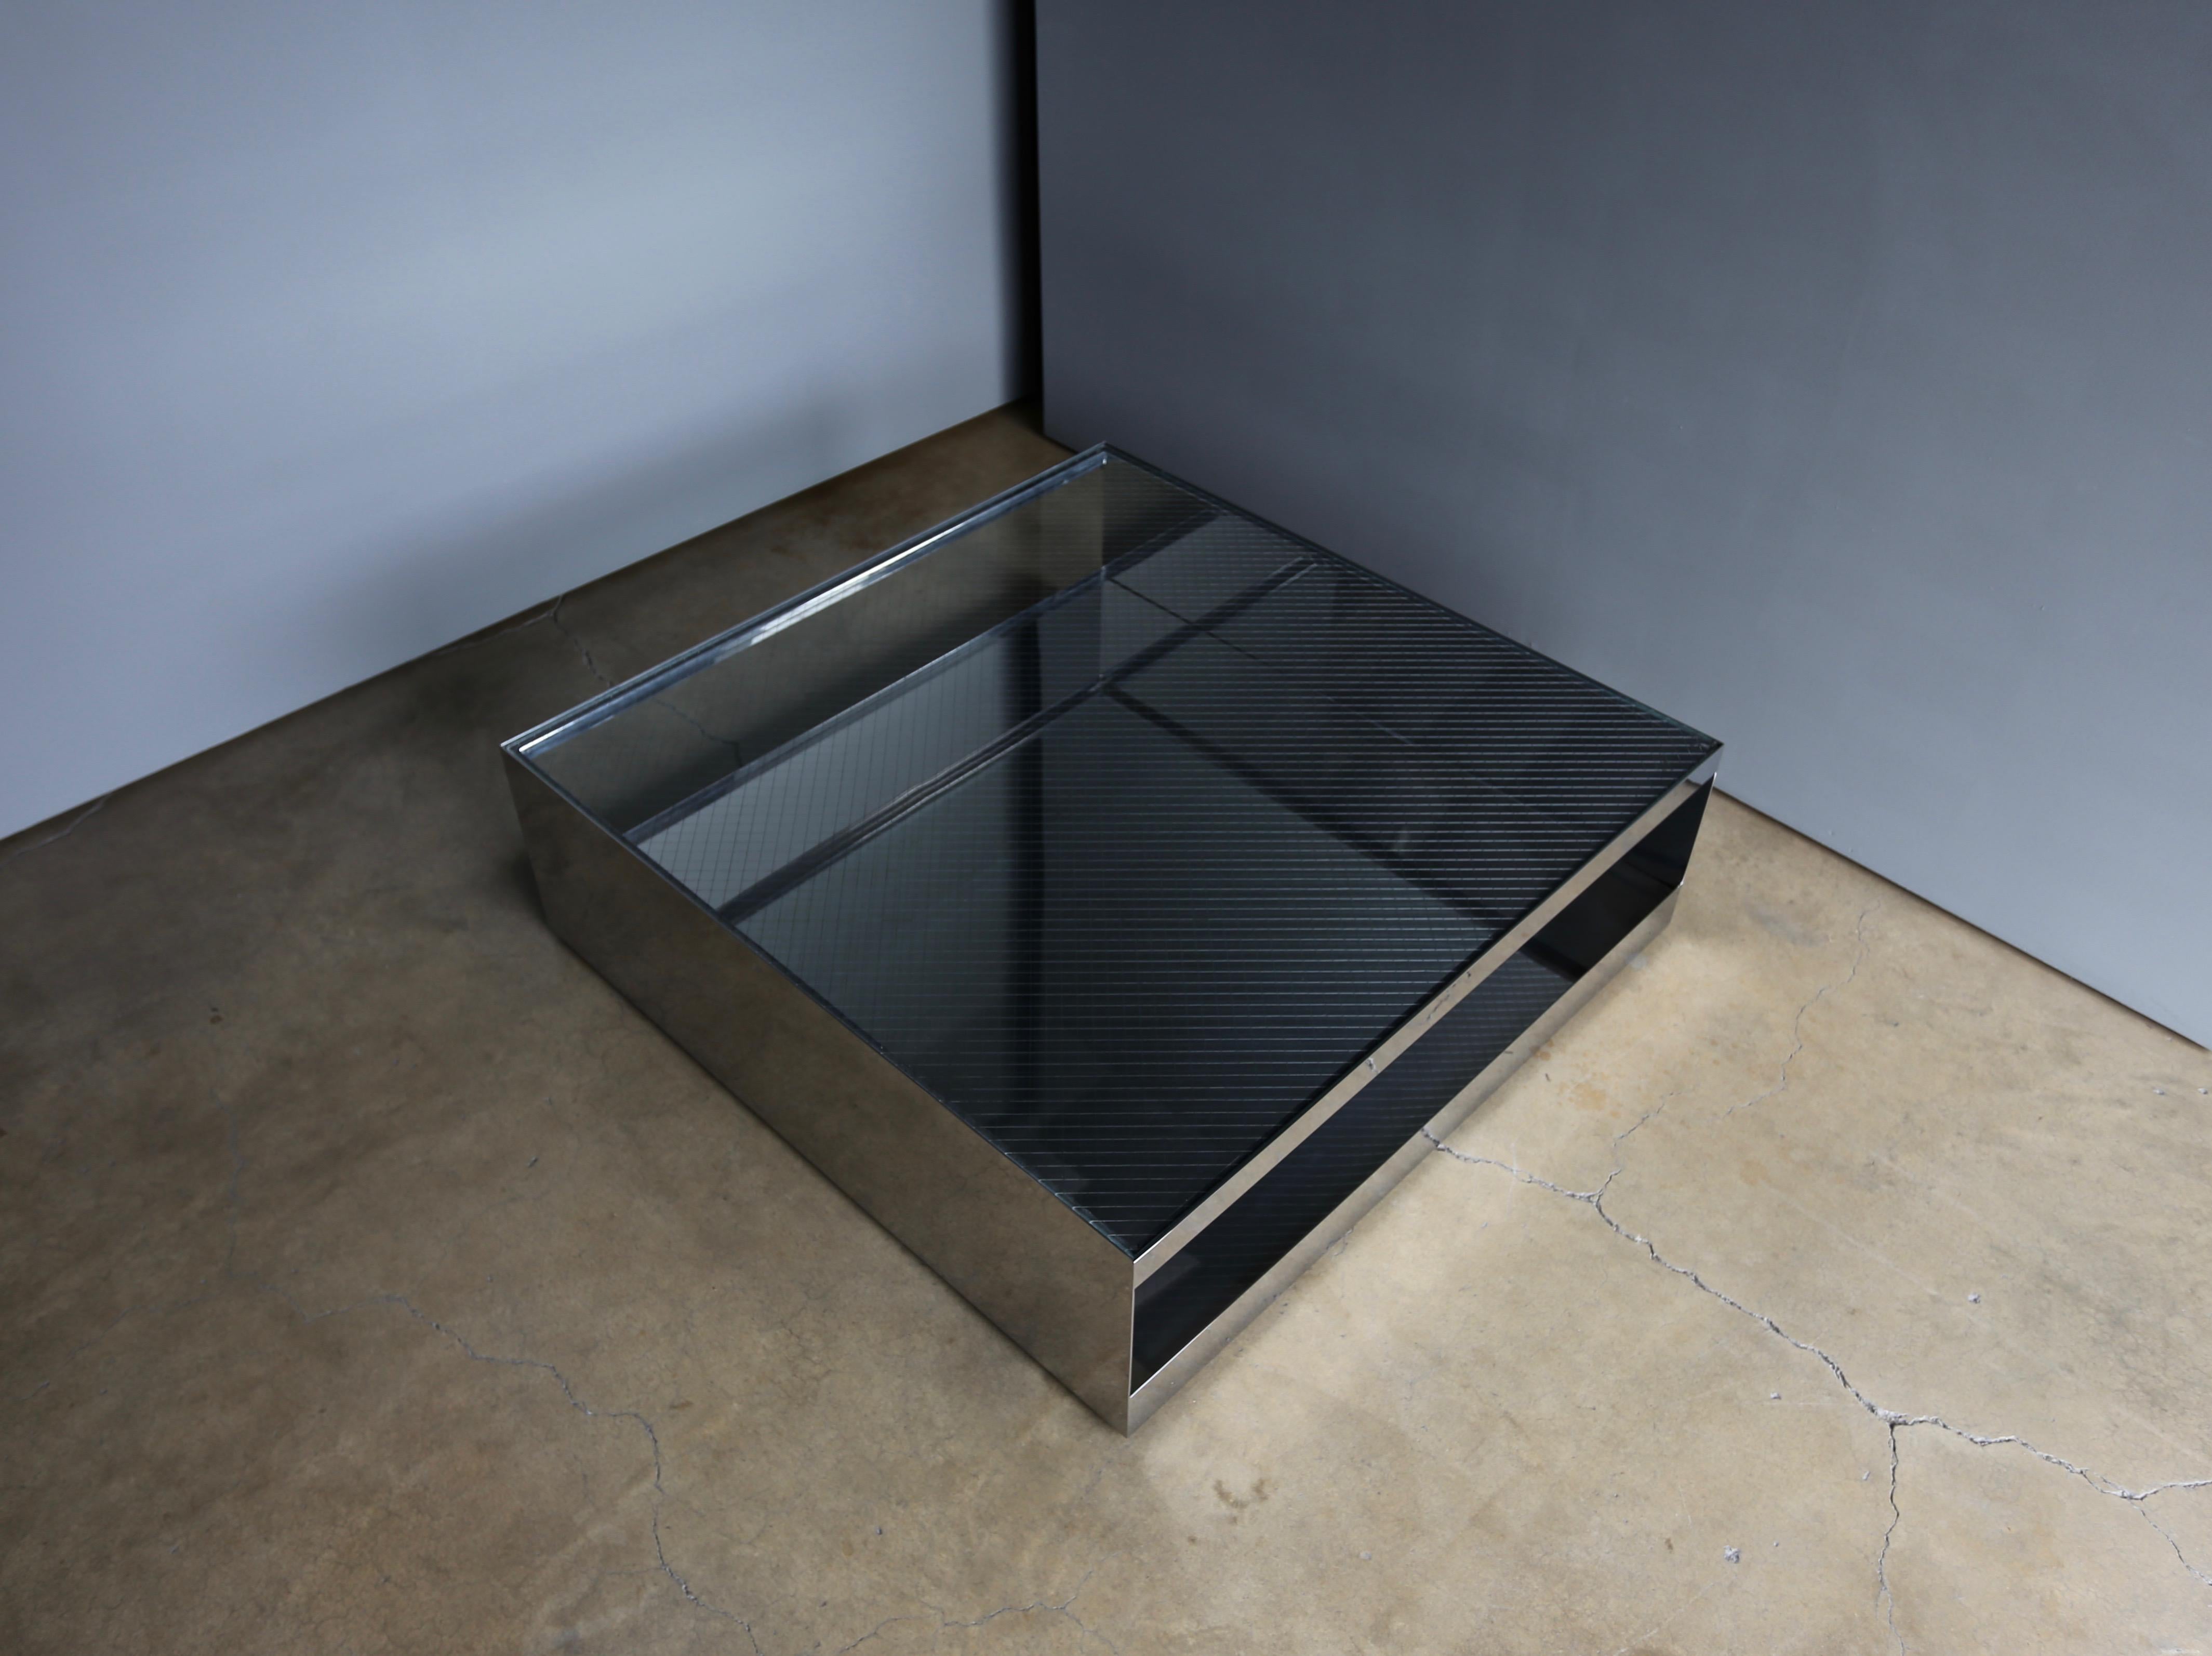 20th Century Joe D'urso Polished Stainless Steel Coffee Table for Knoll, circa 1981